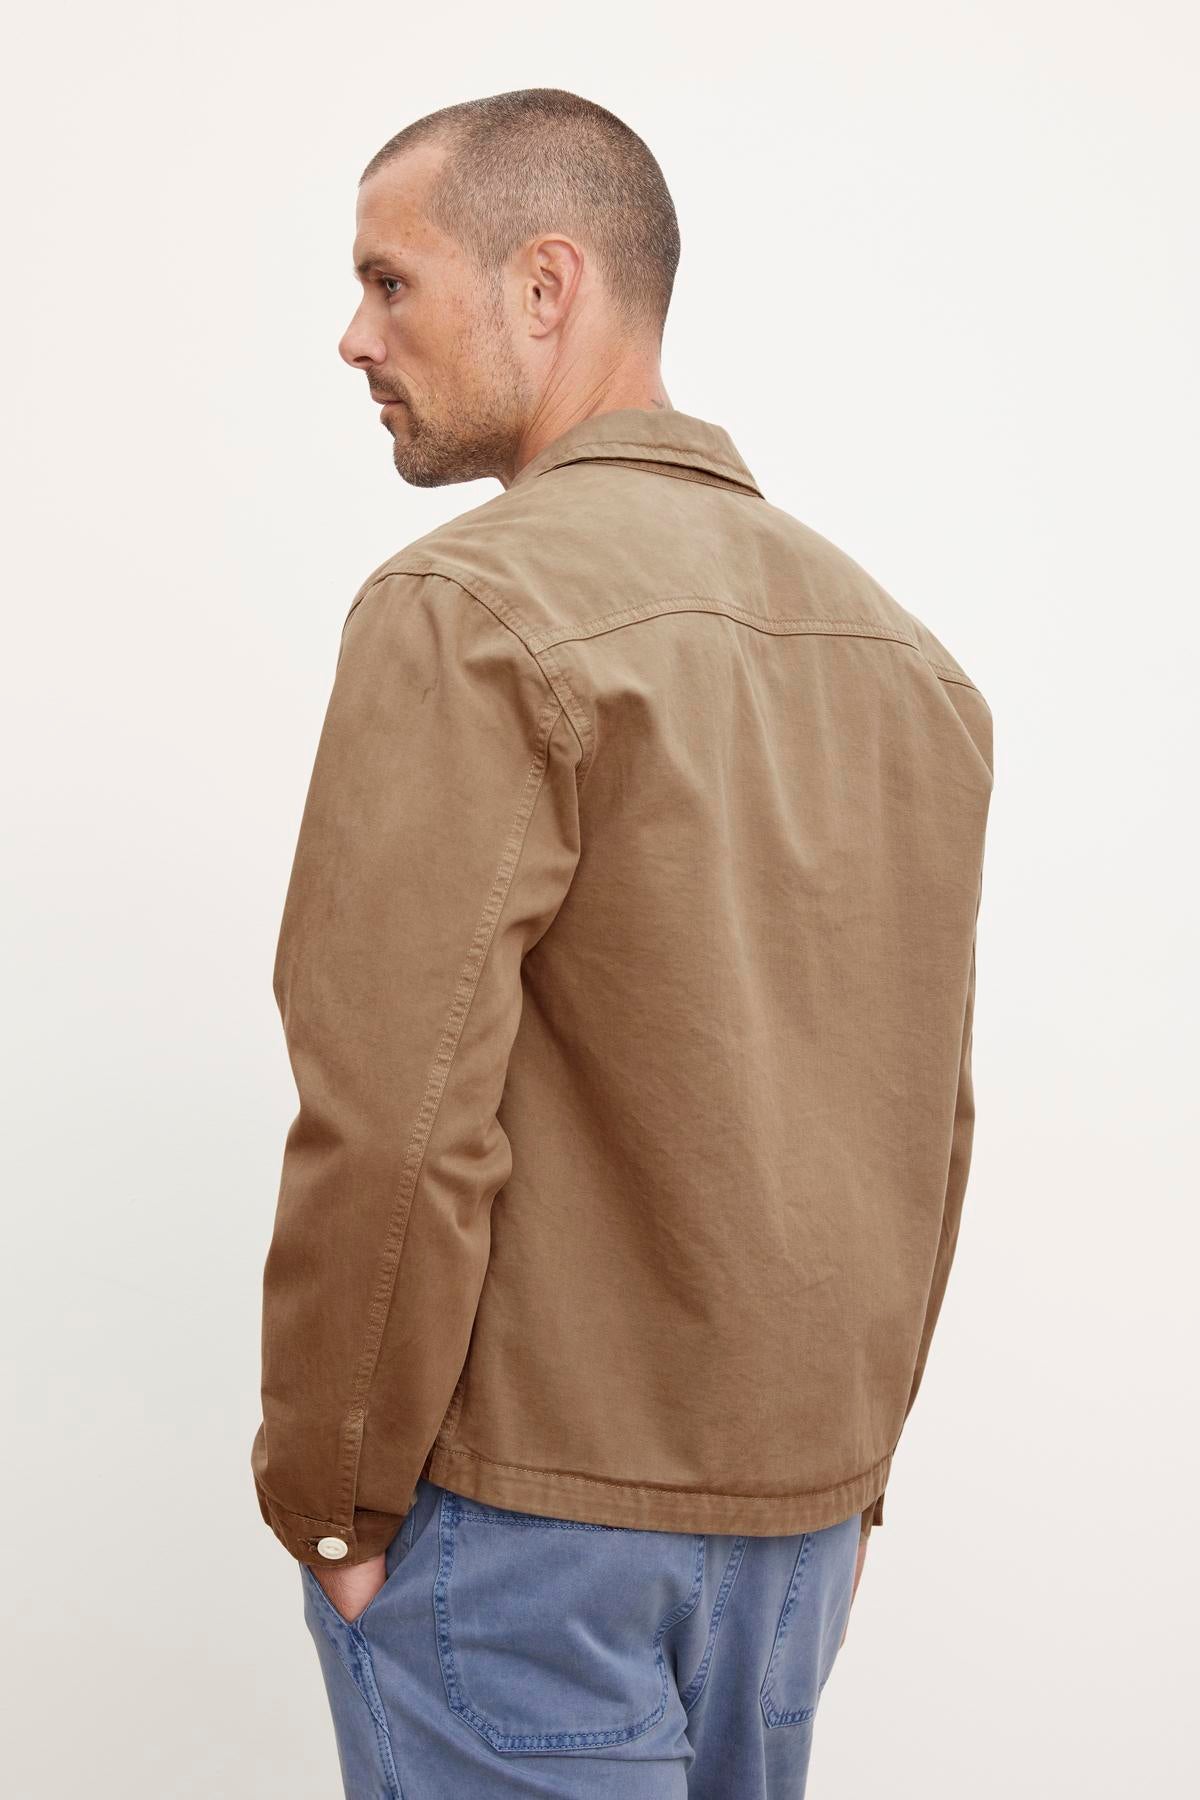 A man in profile wearing a Velvet by Graham & Spencer Flannery Sanded Twill Button-Up Jacket and blue jeans against a neutral background.-36388077699265